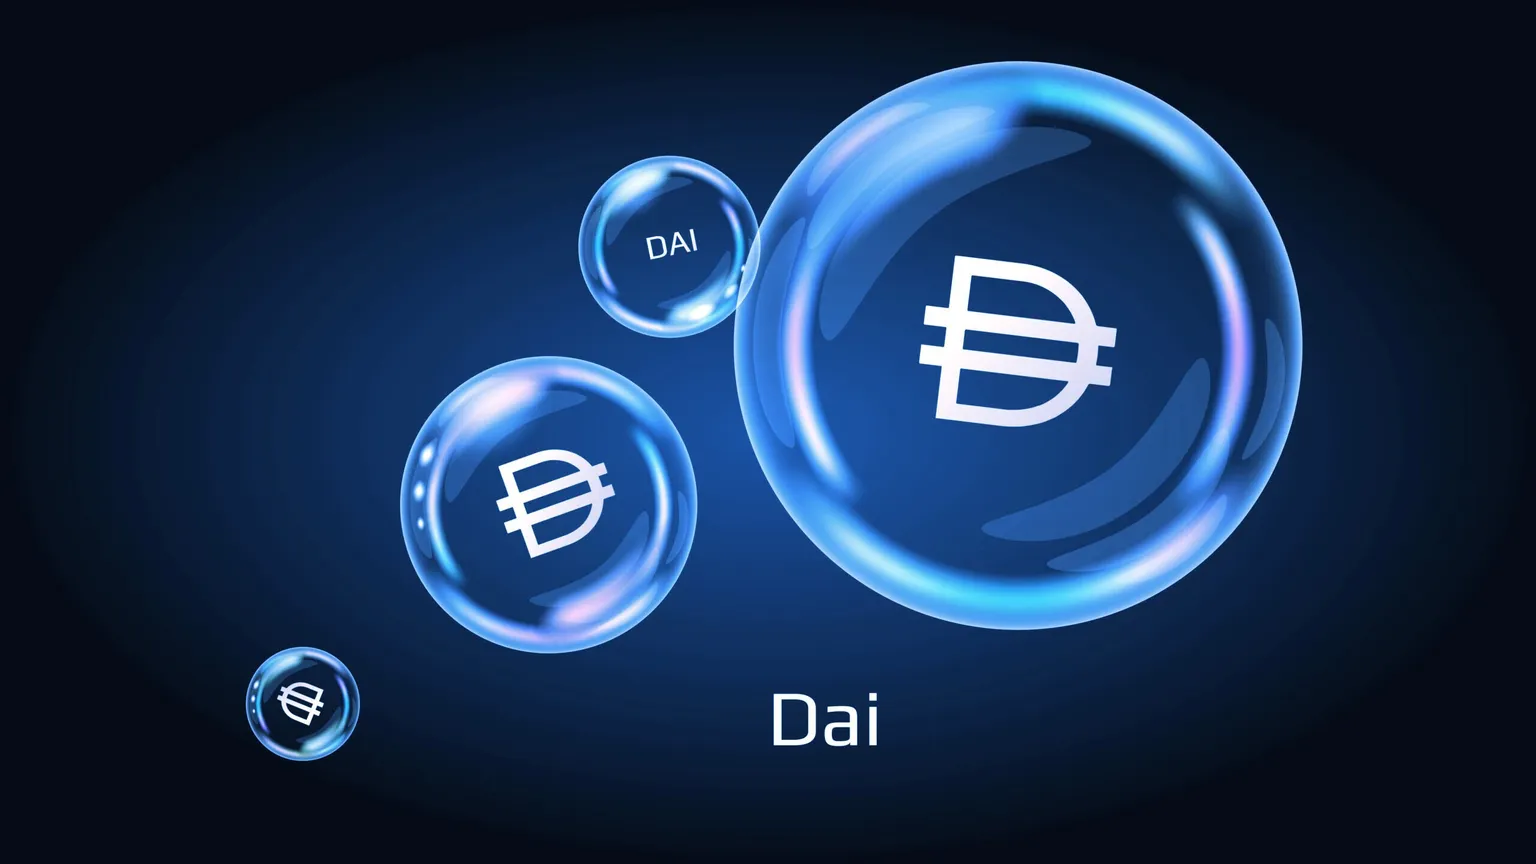 DAI is the biggest decentralized stablecoin. Image: Shutterstock.